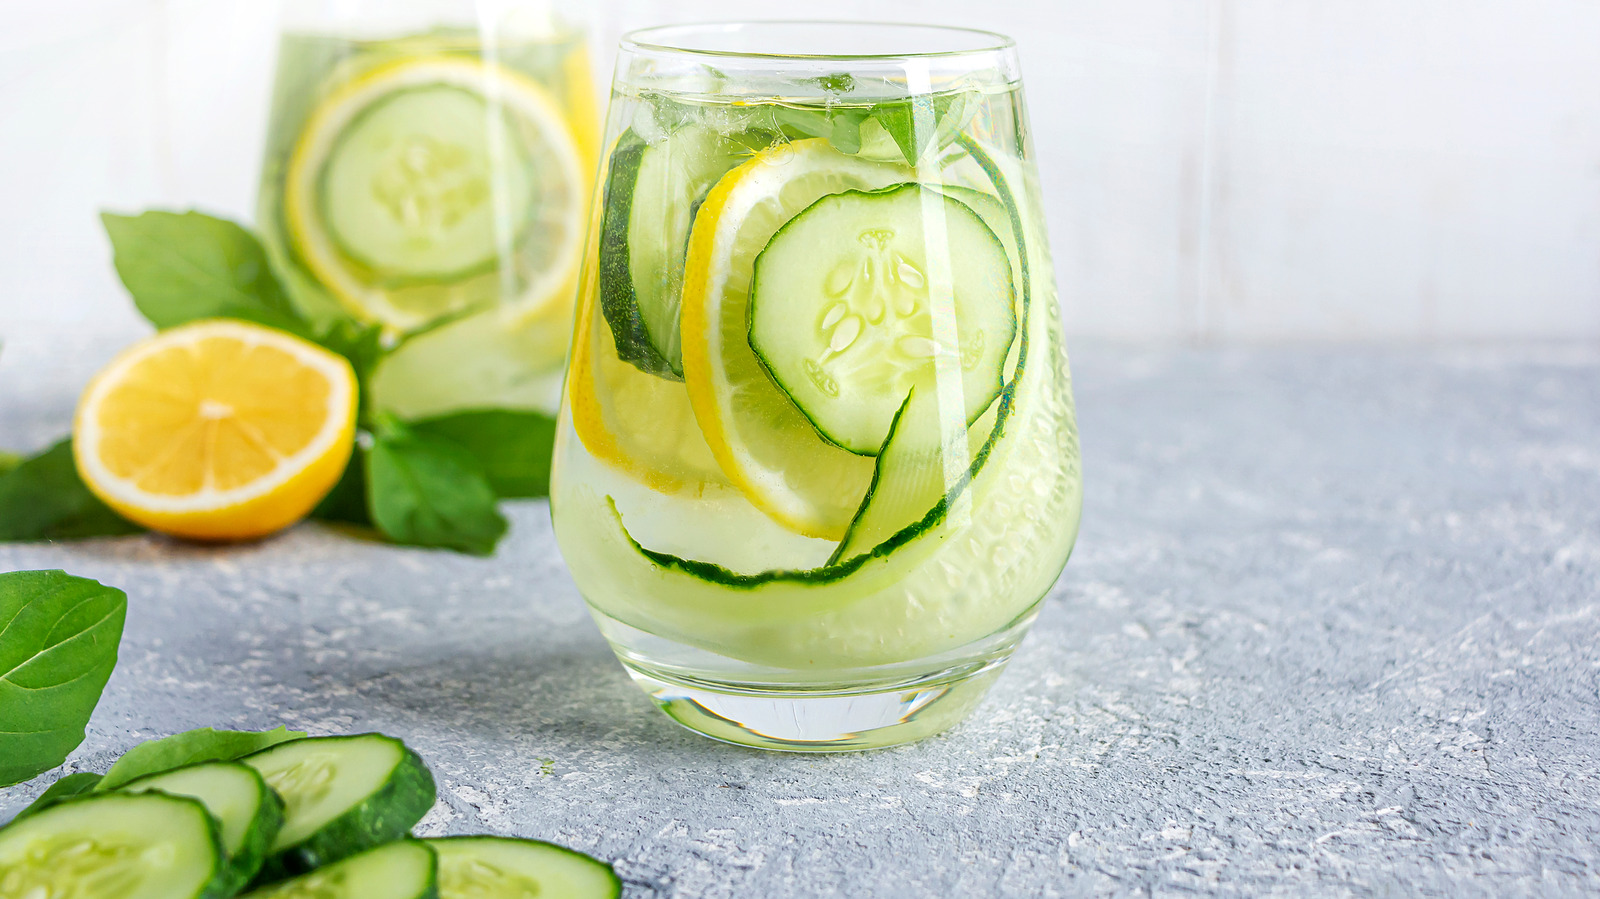 How to Make Cucumber Water and Other Flavored Waters